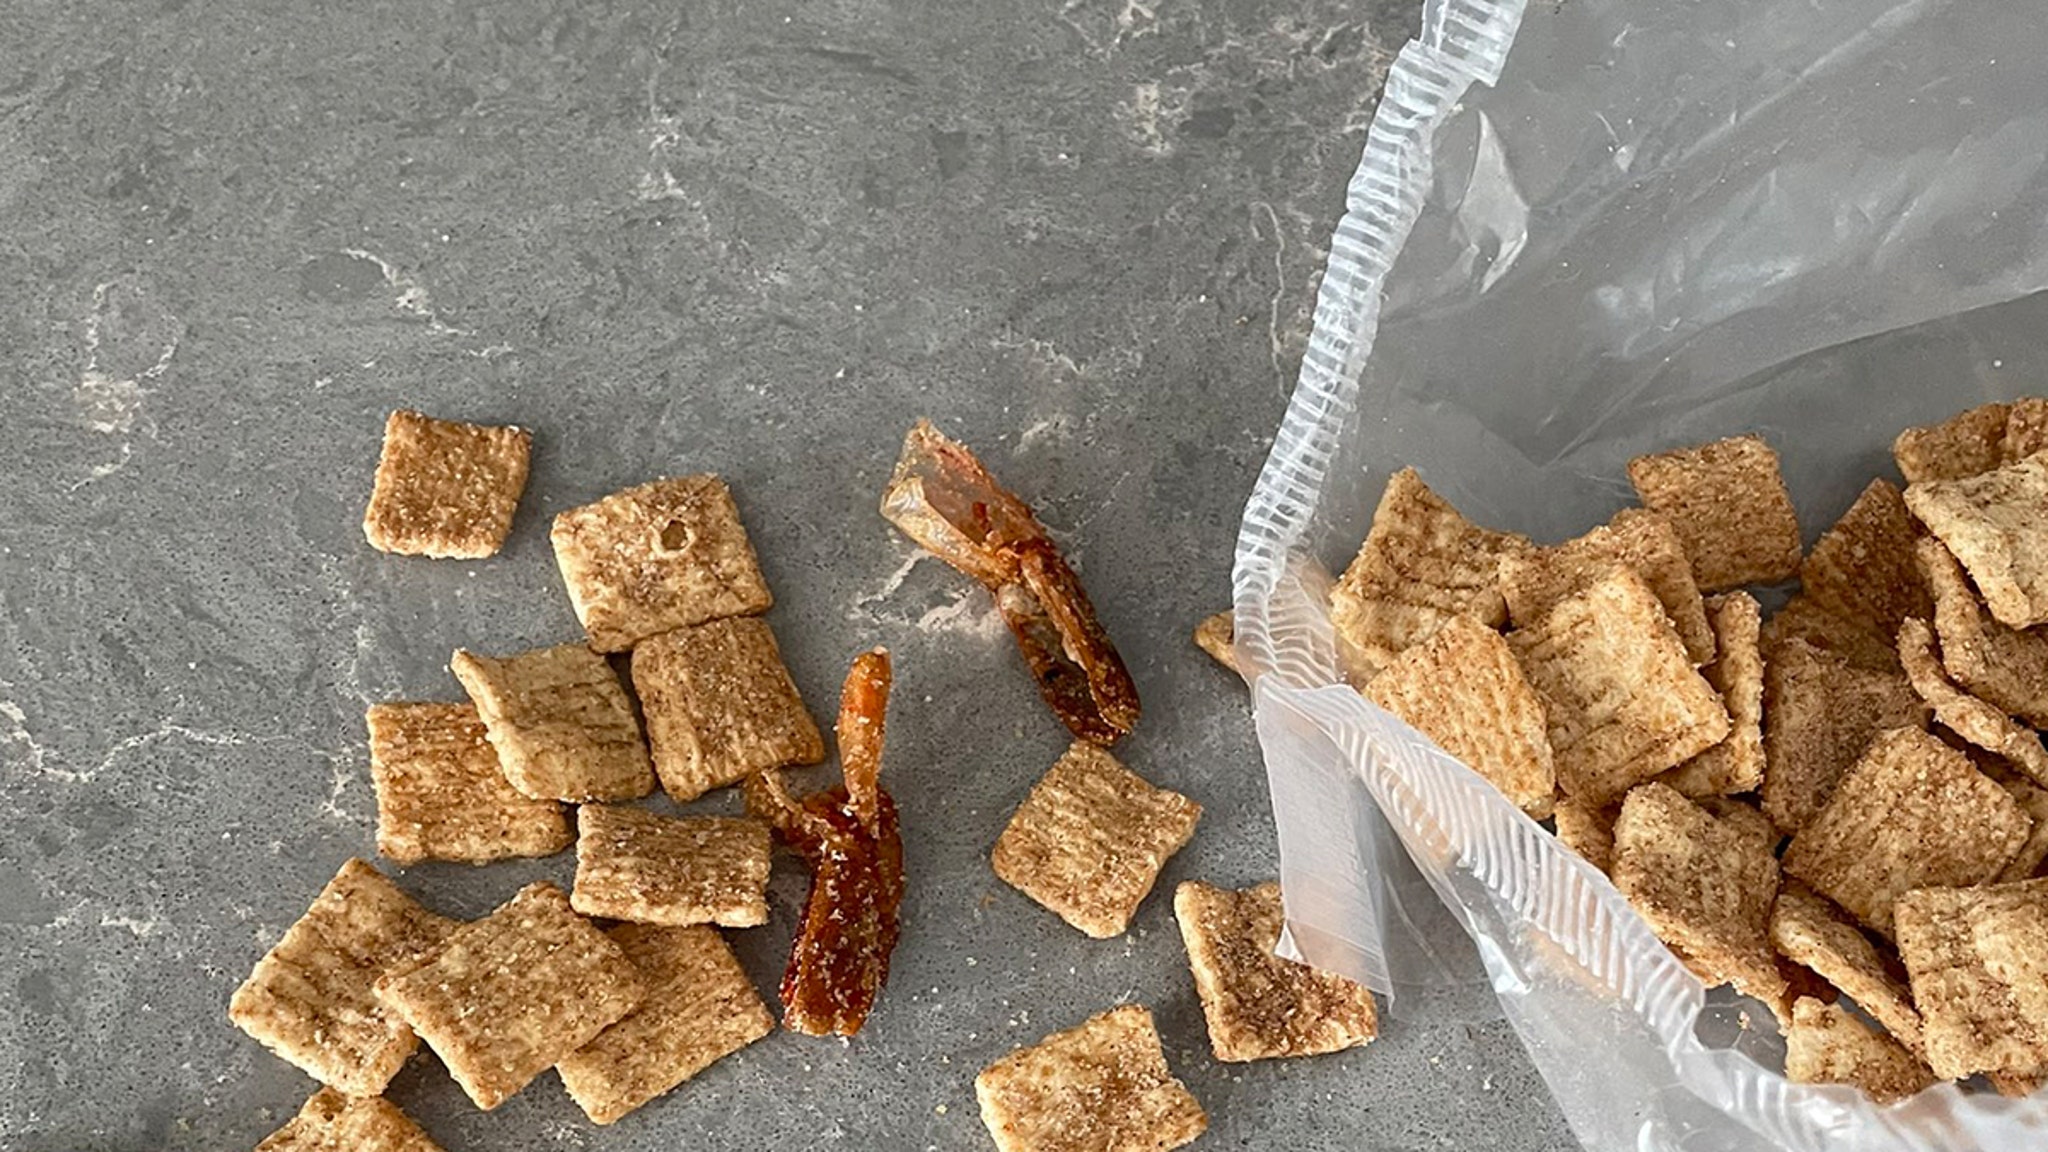 Shrimp tails and other goodies allegedly found on cinnamon toast